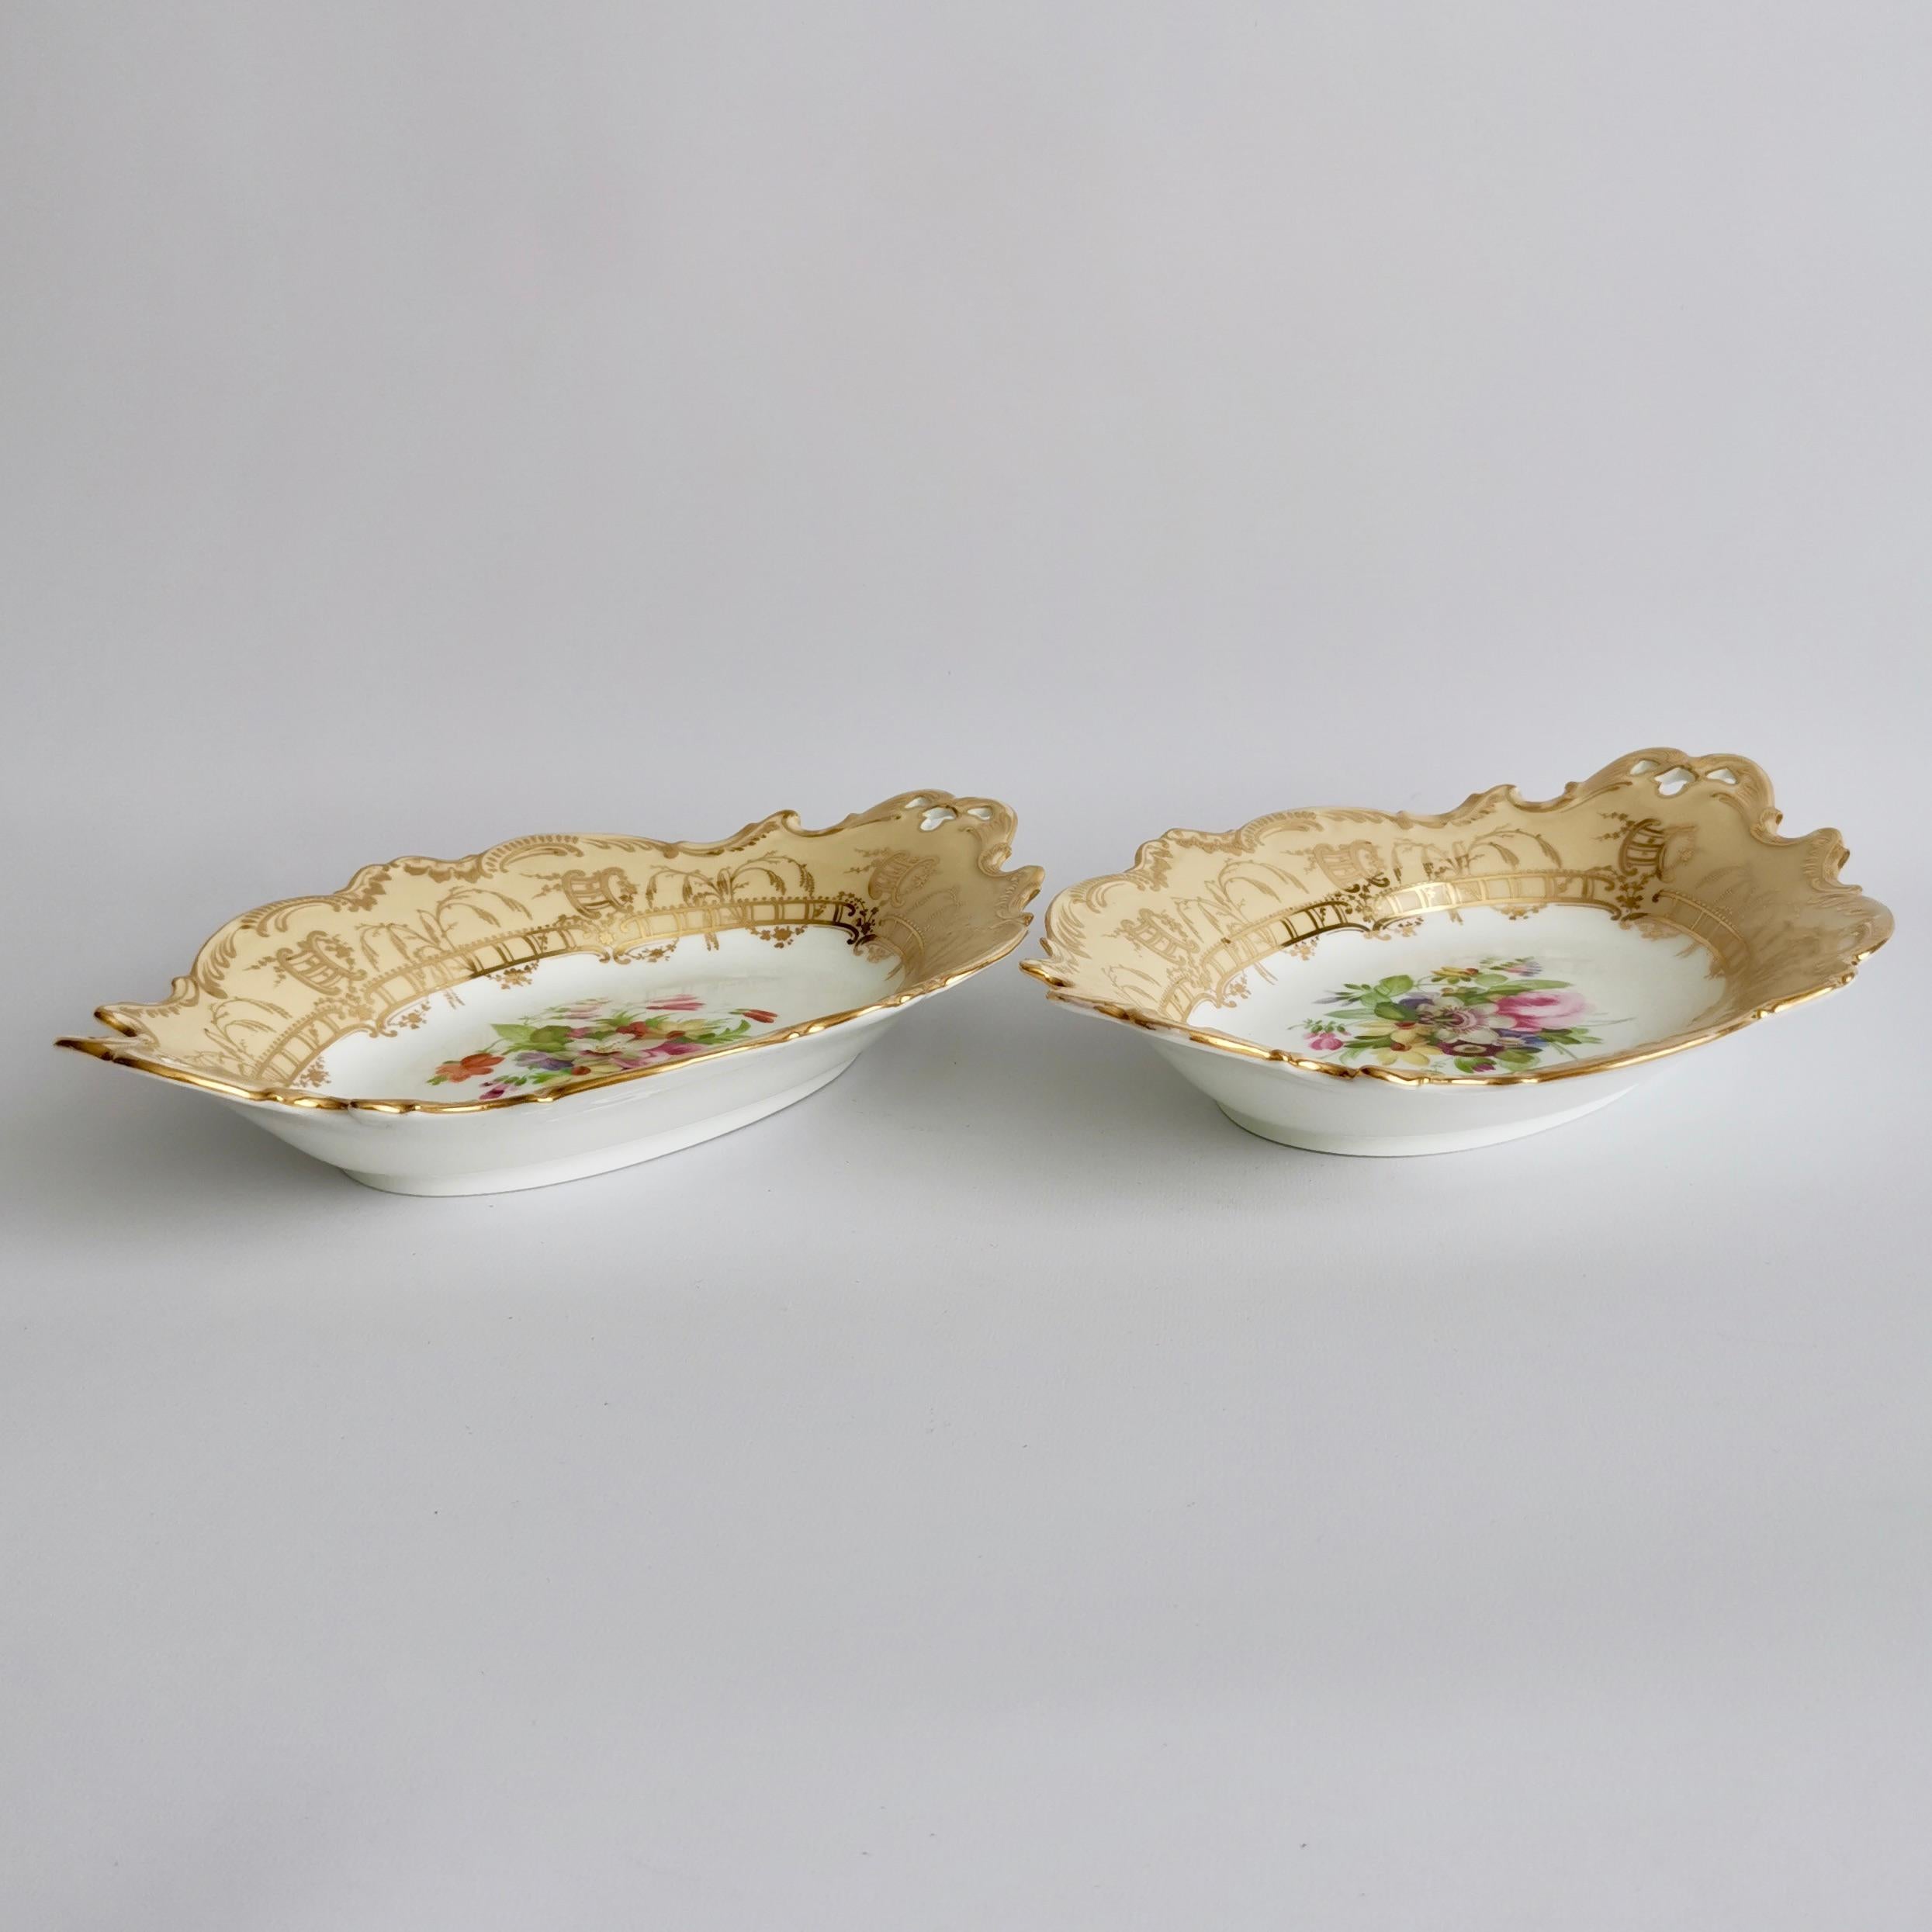 Coalport Set of 2 Oval Dessert Dishes, Beige with Flowers by Thomas Dixon, 1847 4